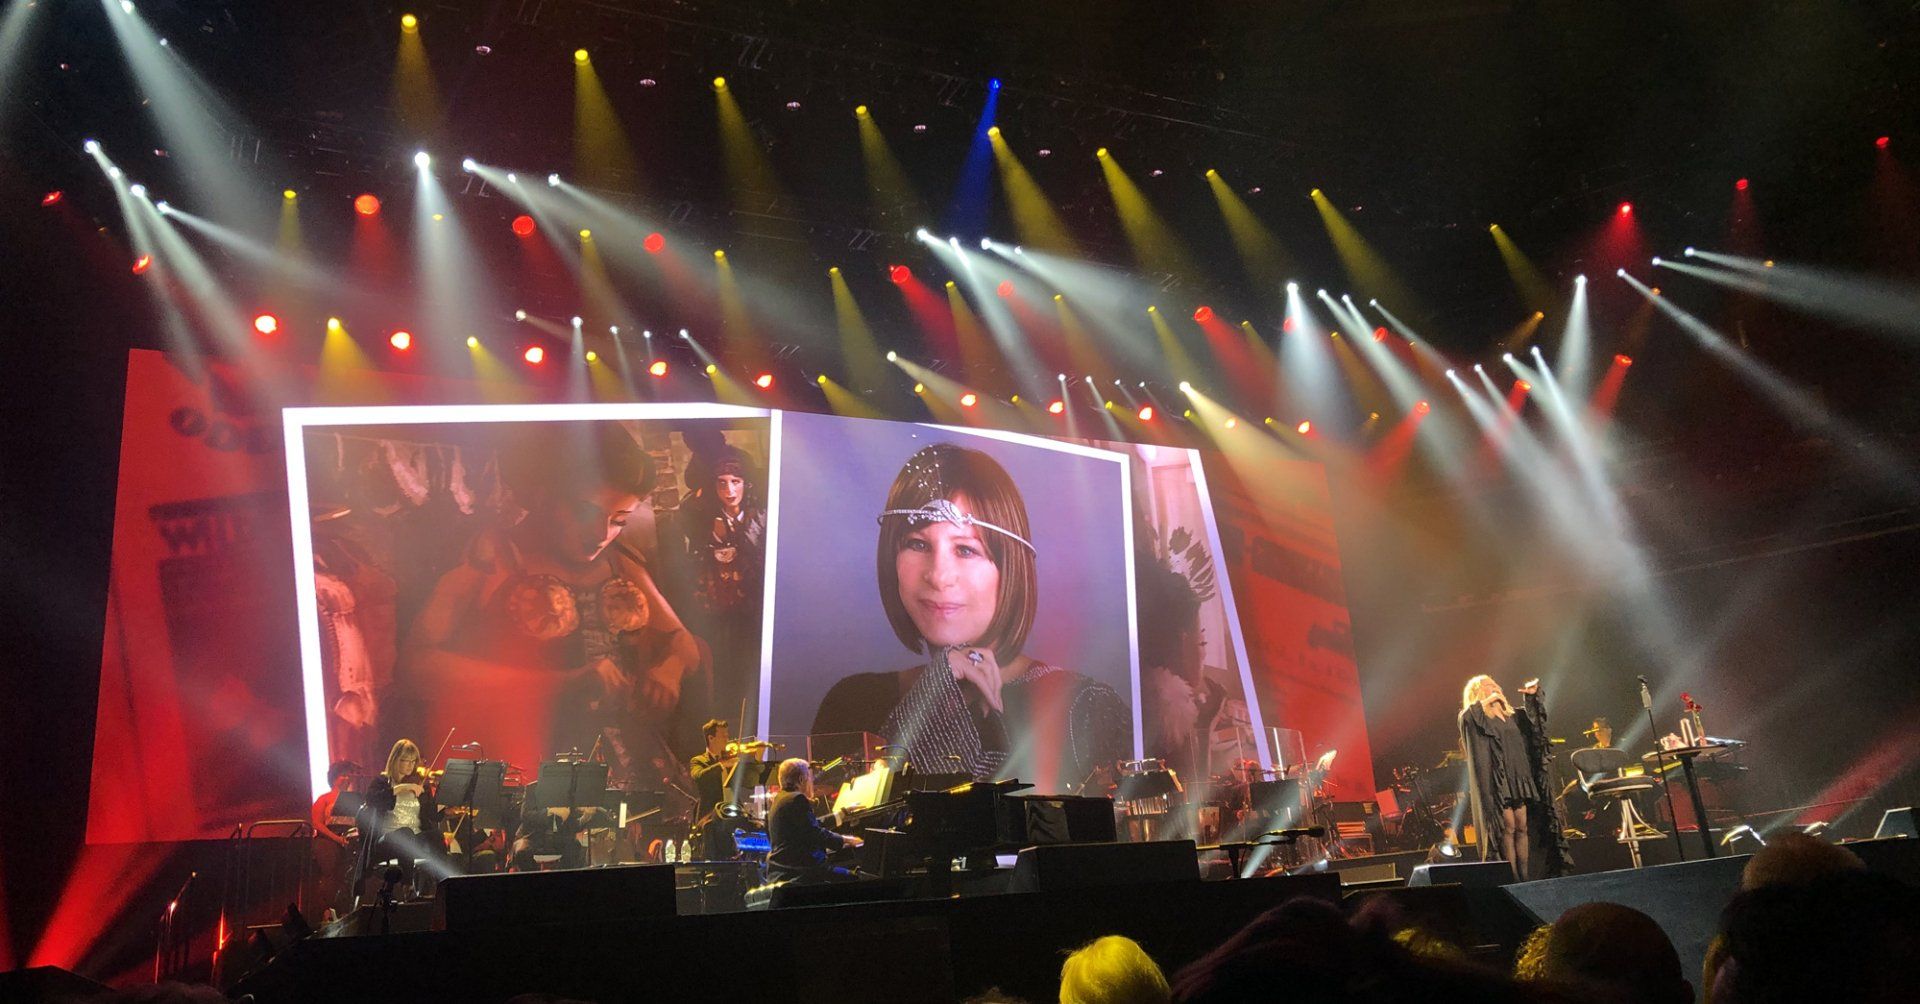 Streisand with her Gypsy costume tests projected on the screen behind her.